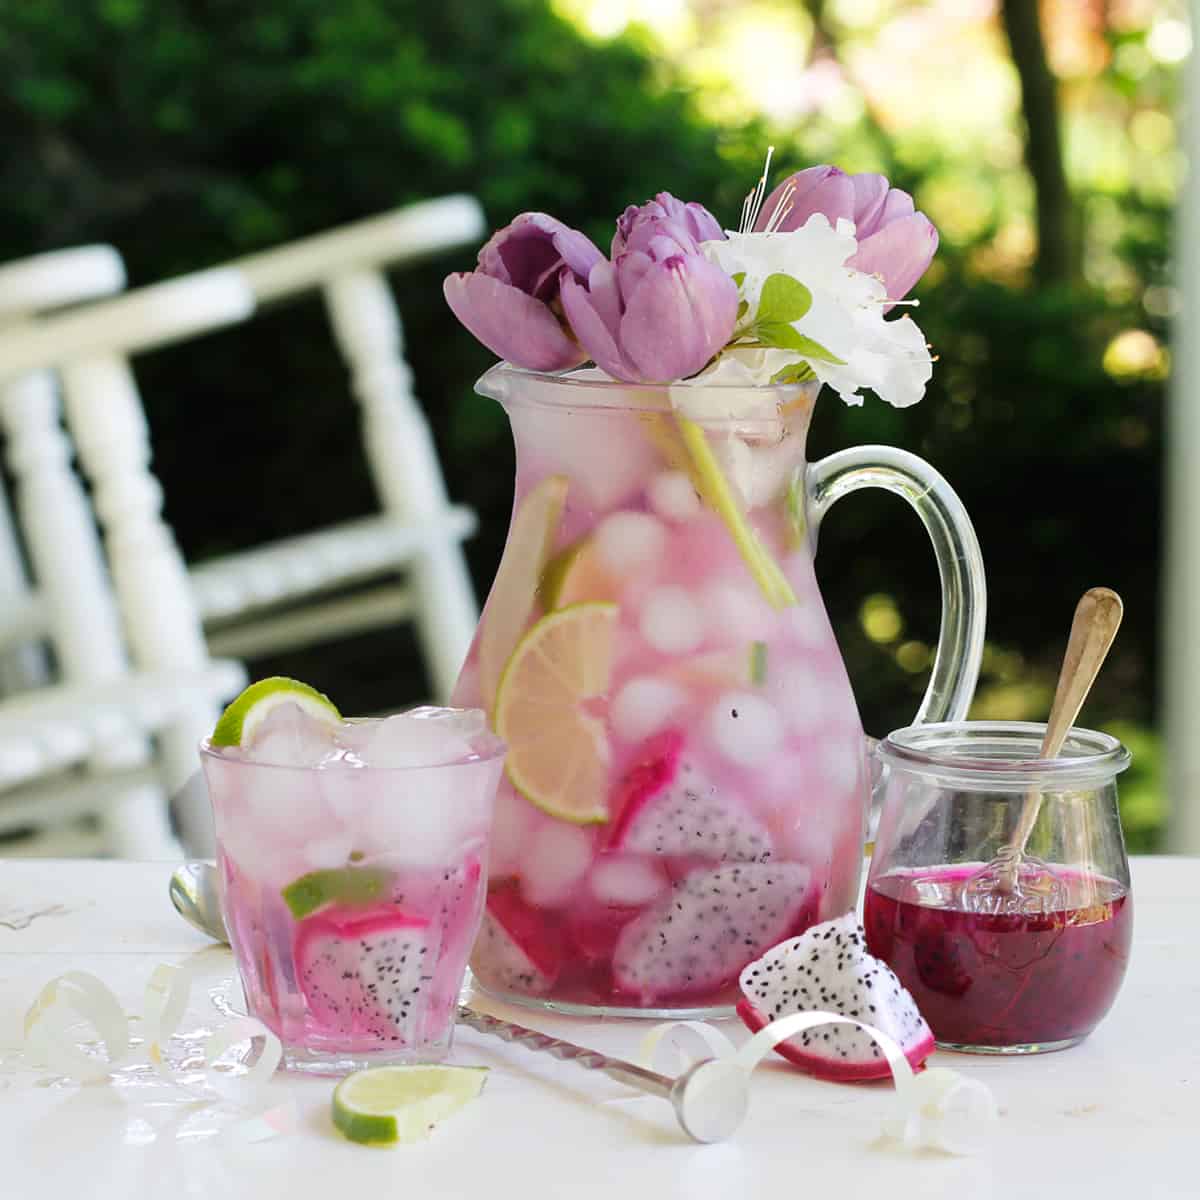 a pitcher of dragon fruit water